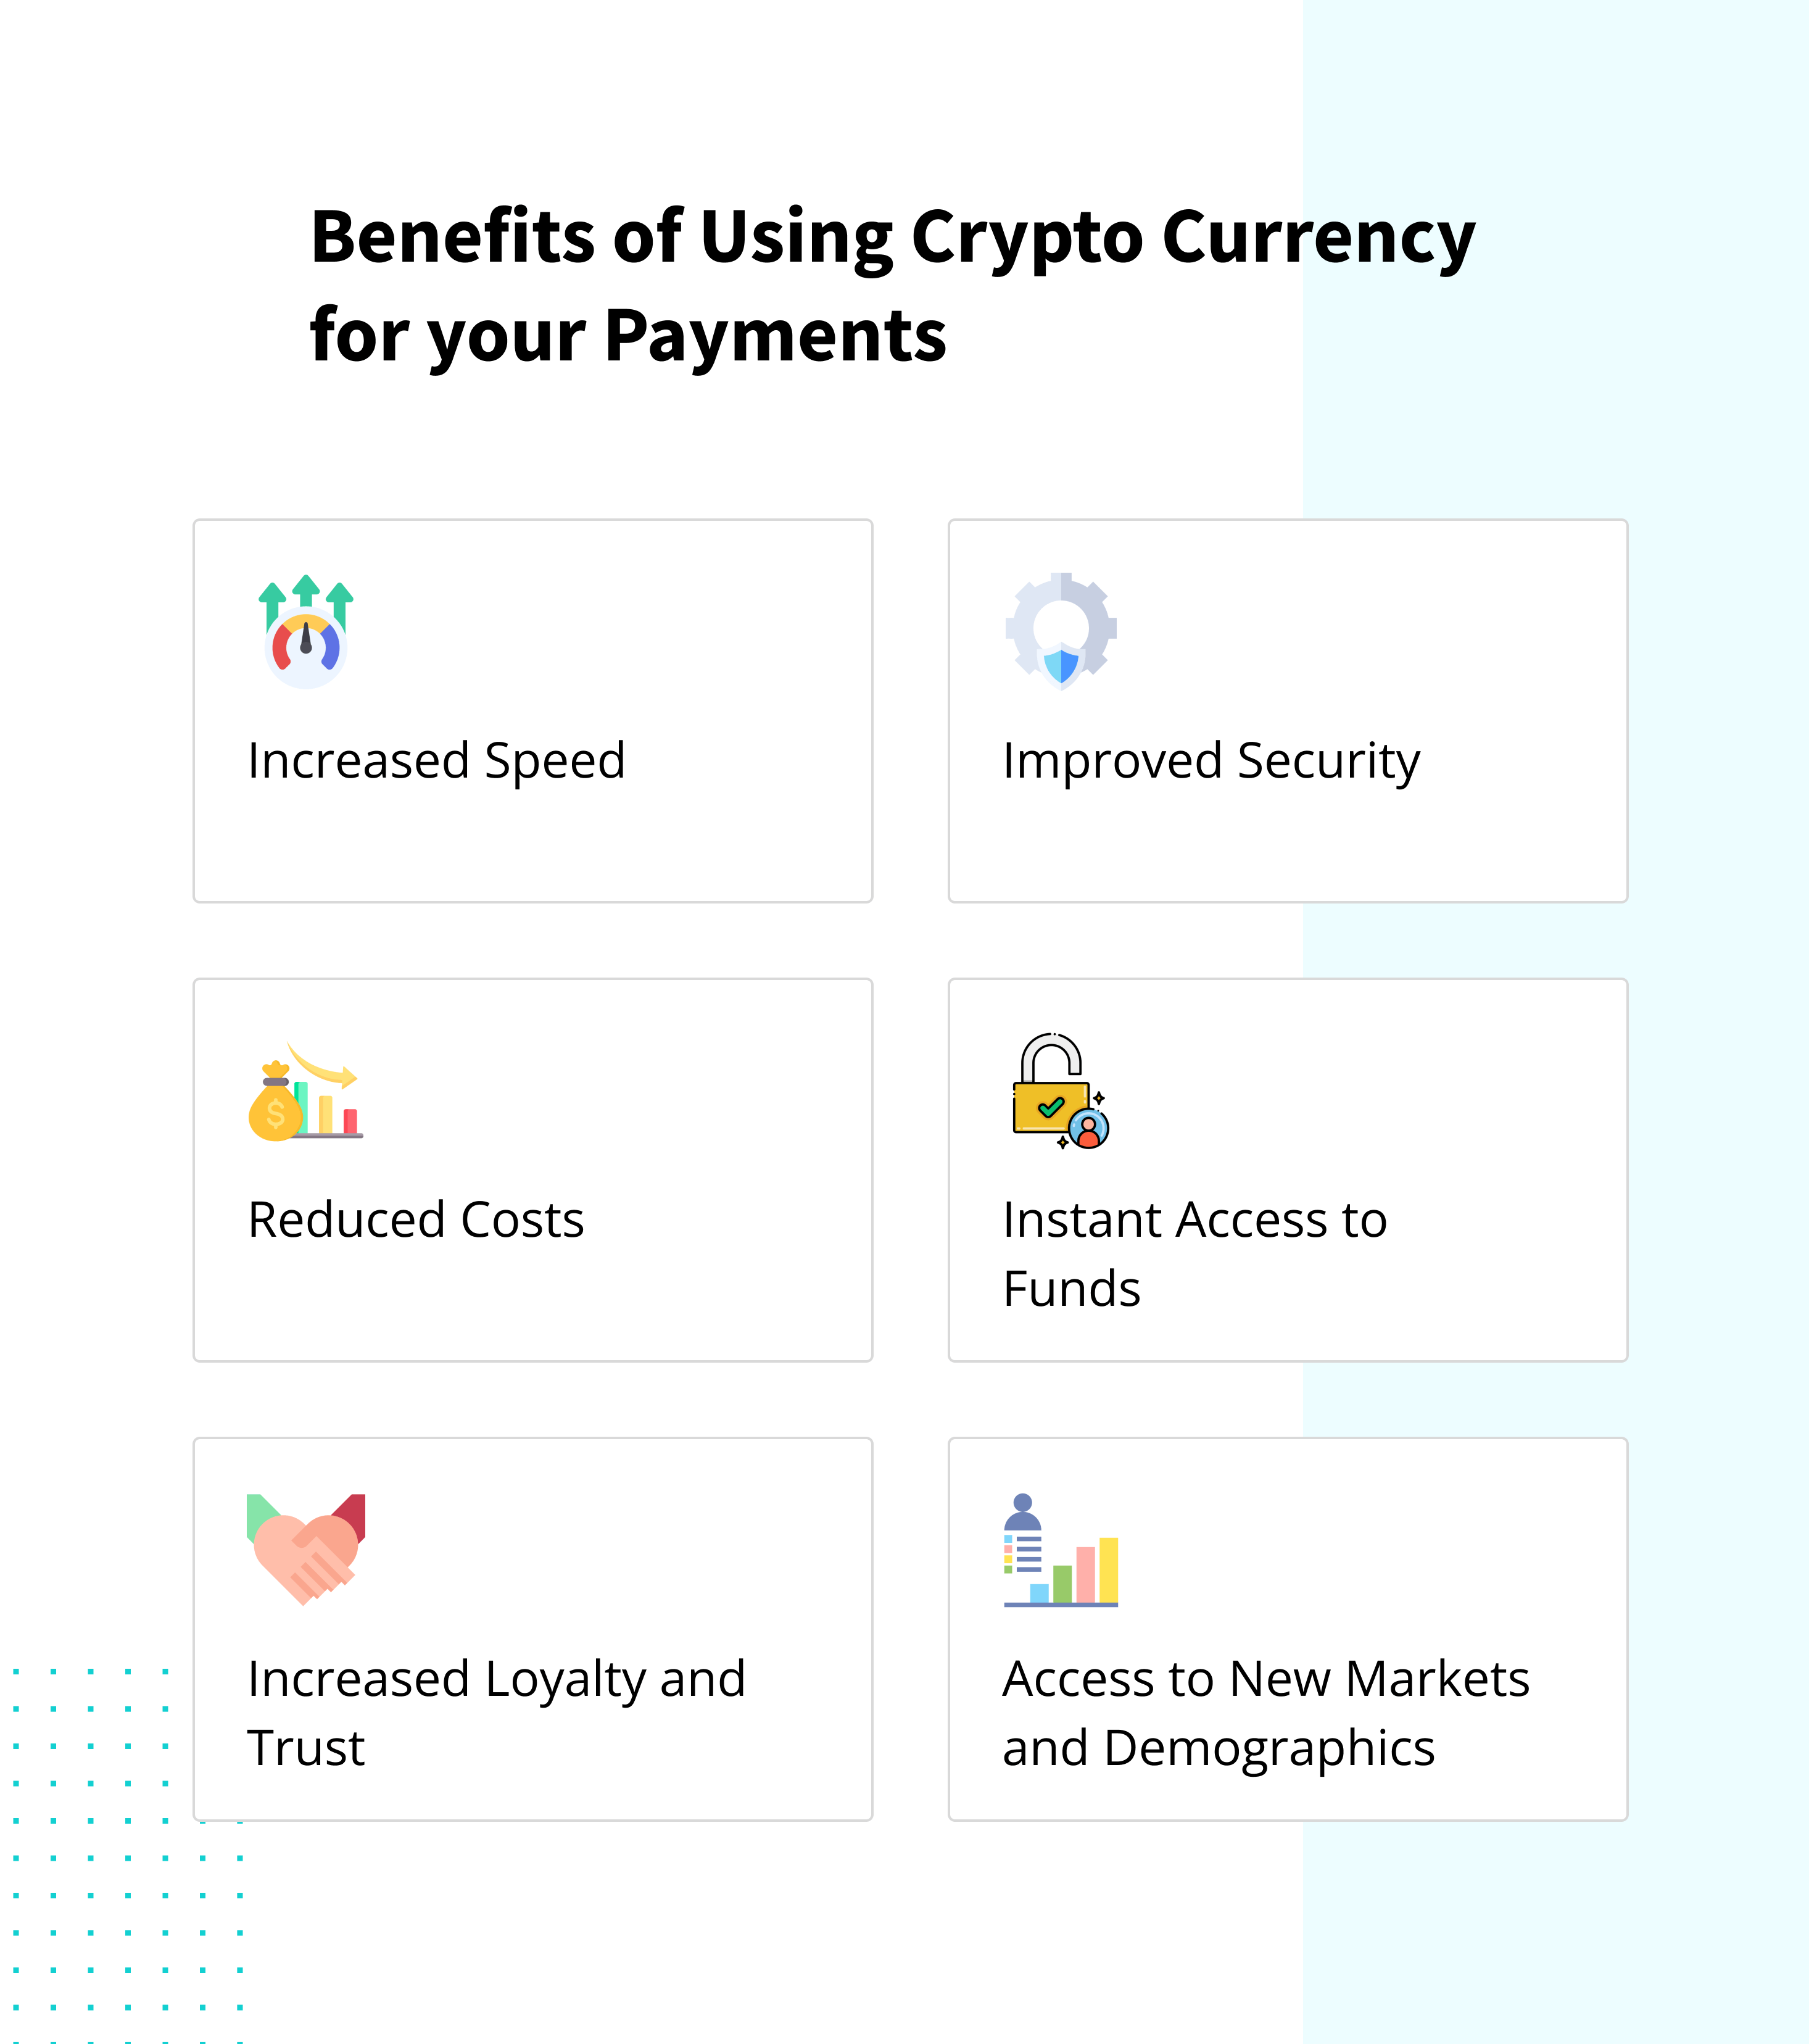 Benefits of Using Crypto Currency for your Payments